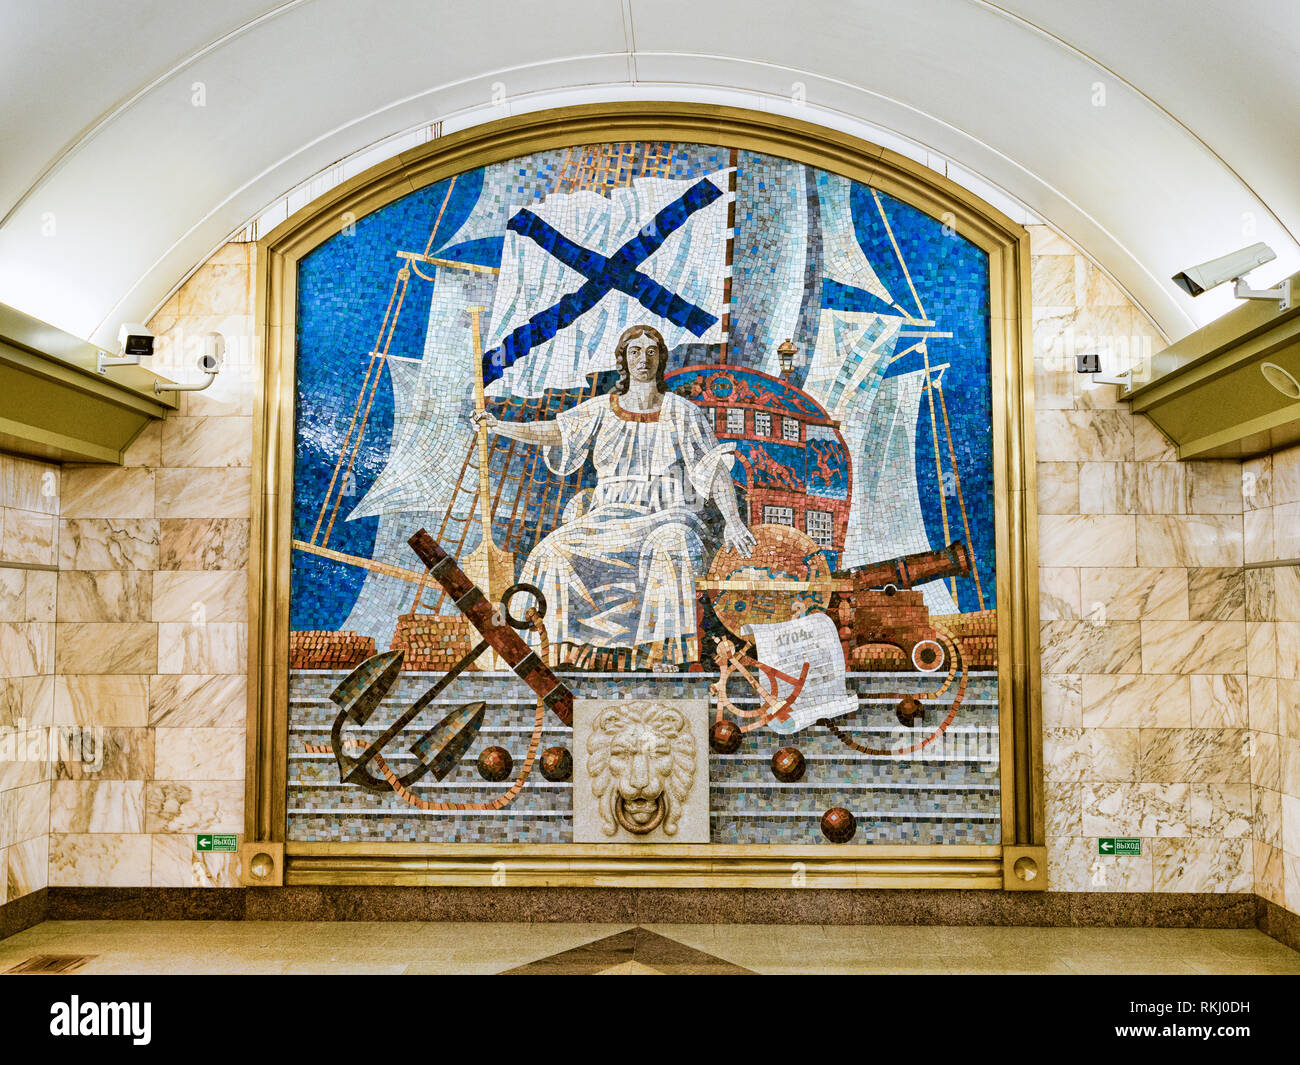 18 September 2018: St Petersburg, Russia - Mosaic representing the Neva River at Admiralty Station on the metro, the deepest metro station in the city Stock Photo